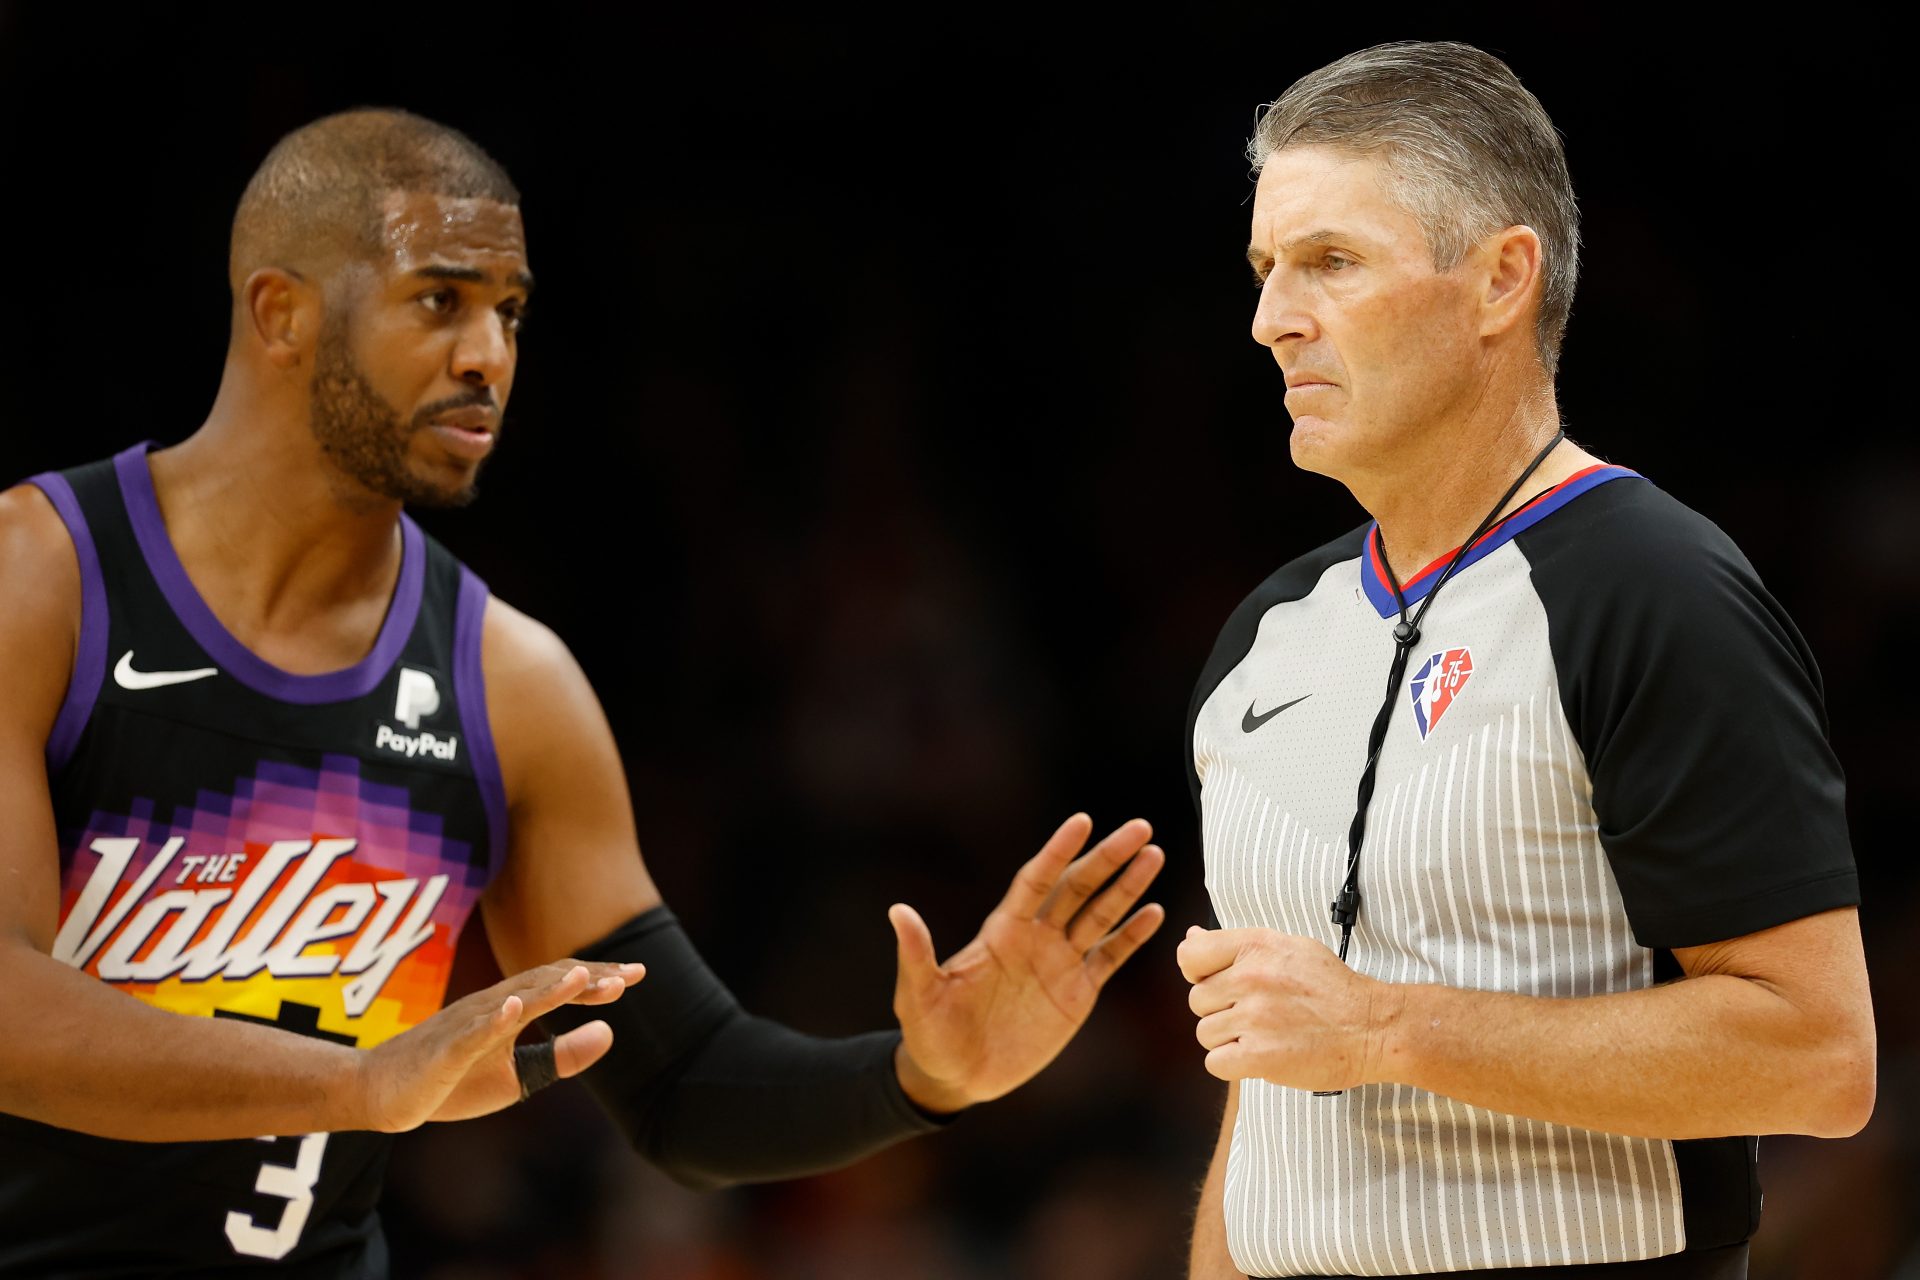 Scott Foster vs Chris Paul: The real reason behind the bad blood is finally revealed...